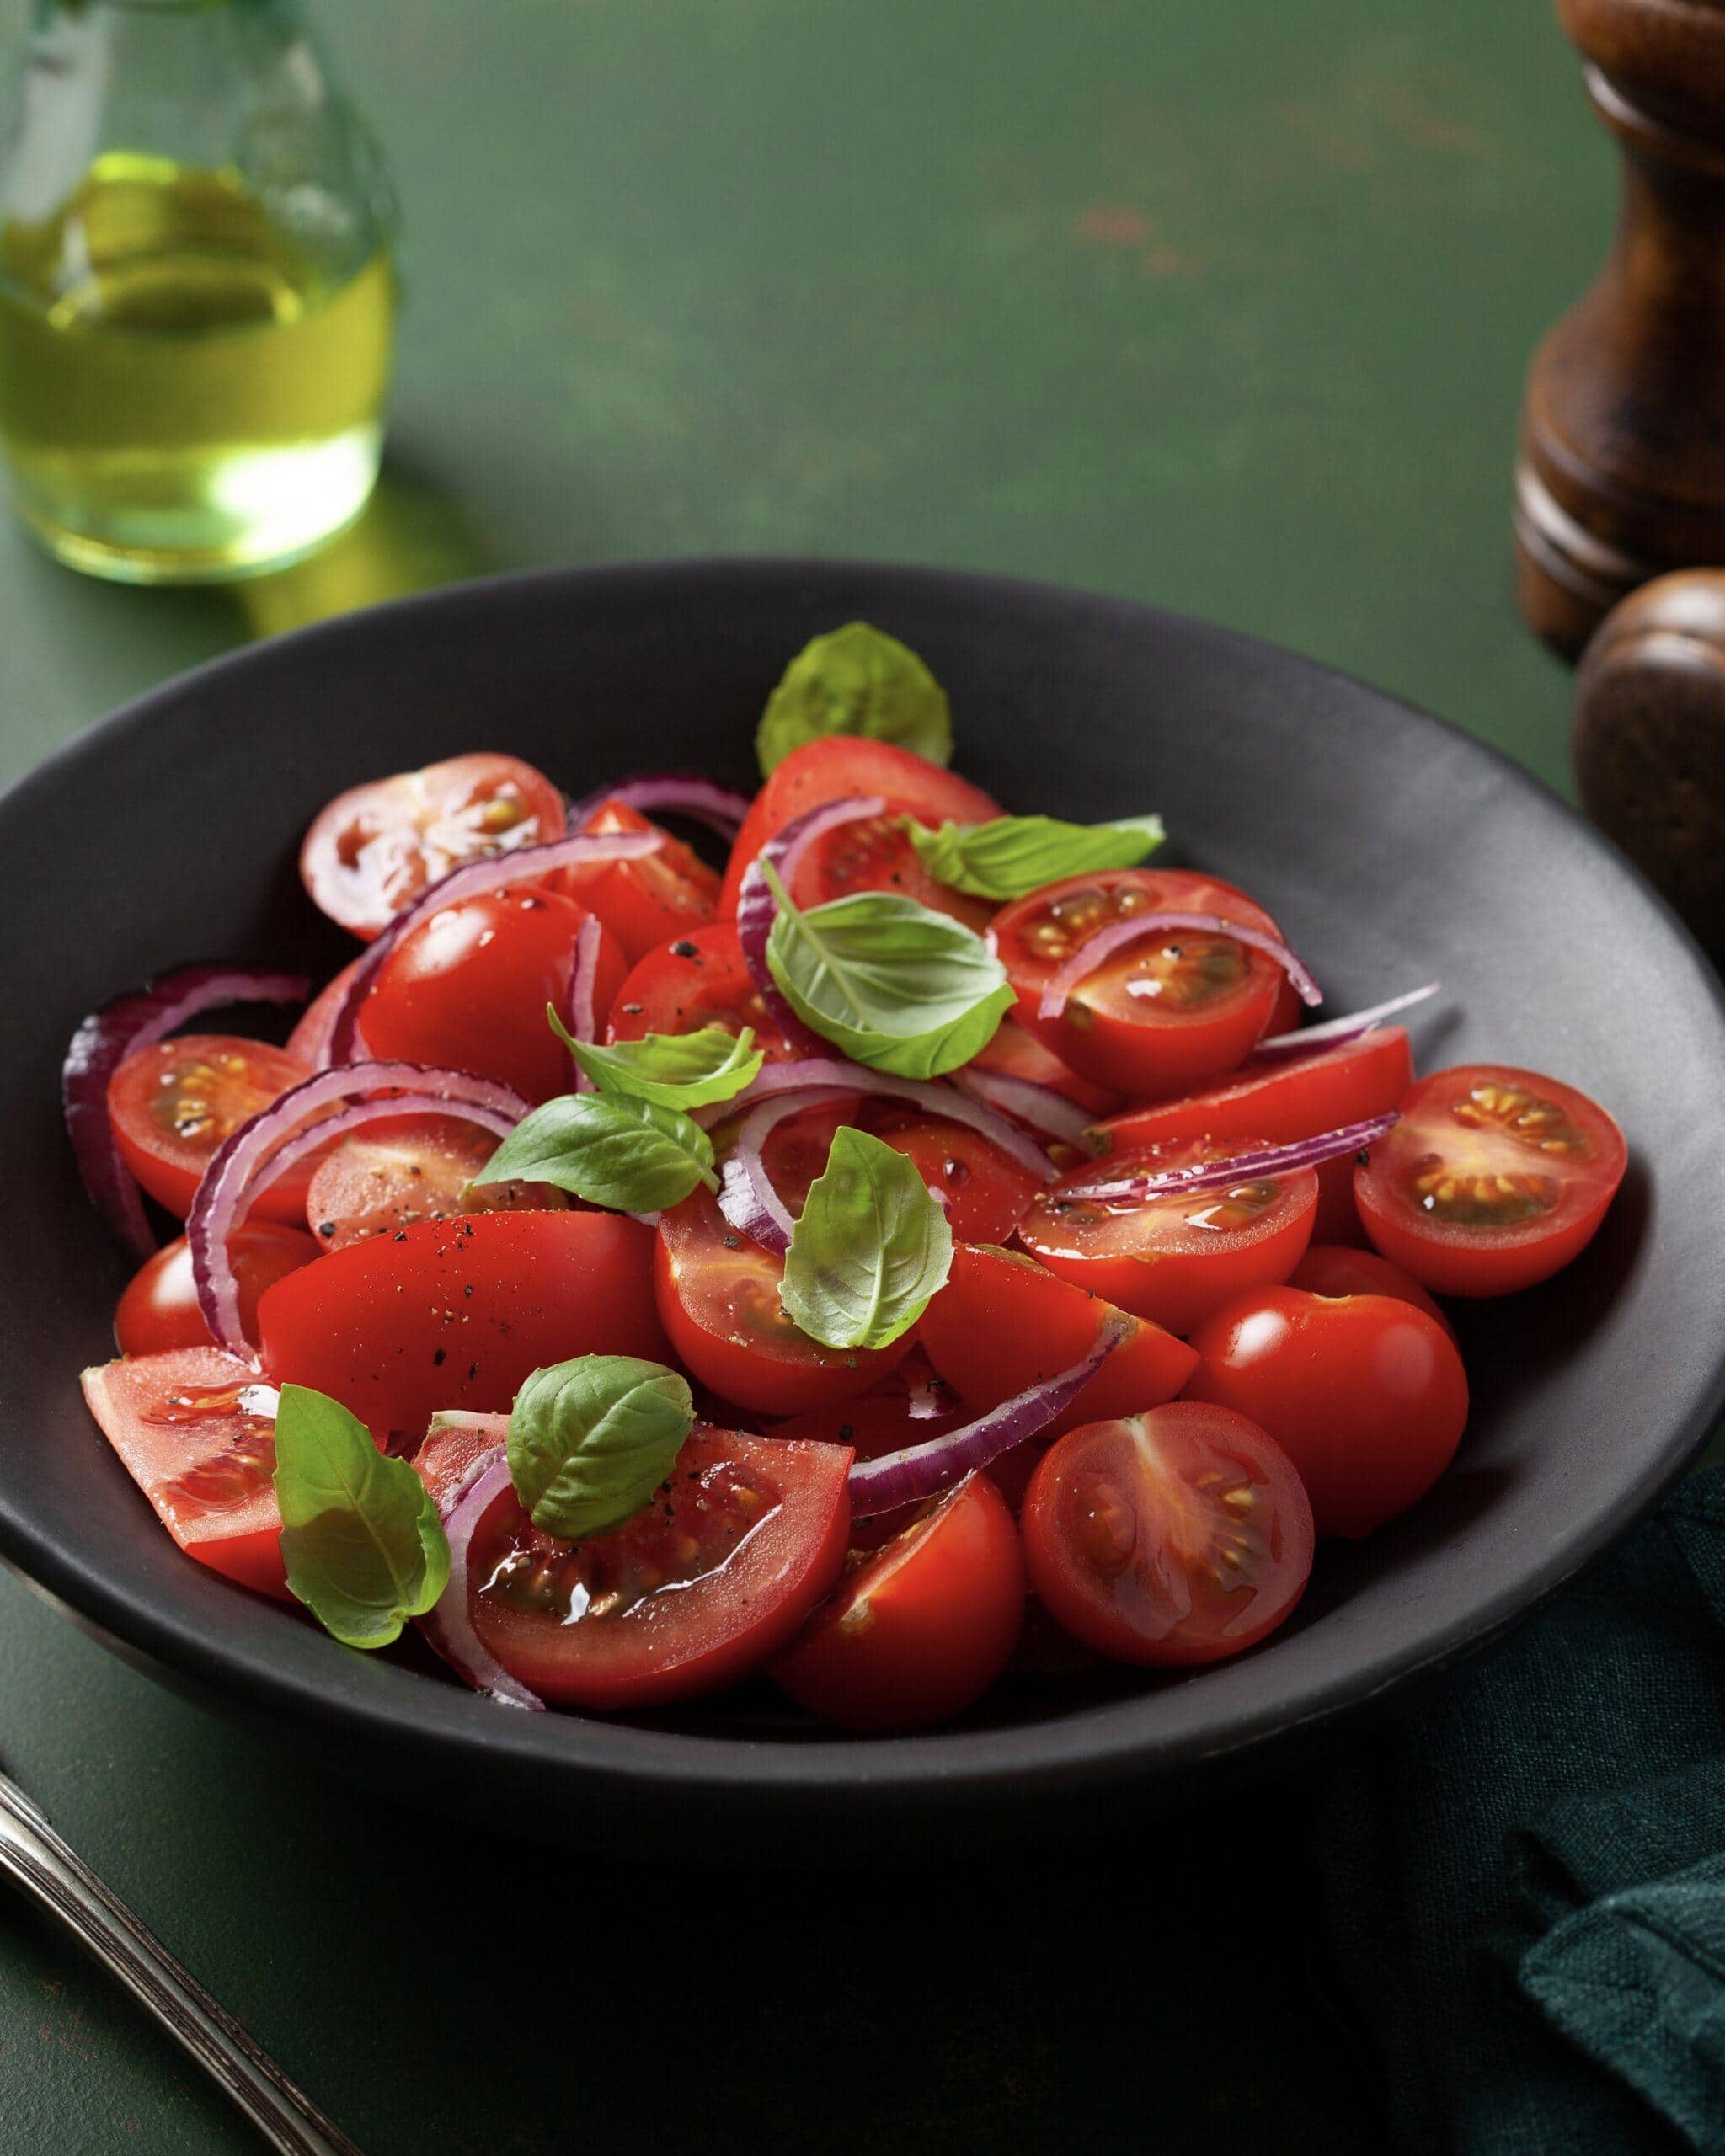 Plate of sliced tomatoes